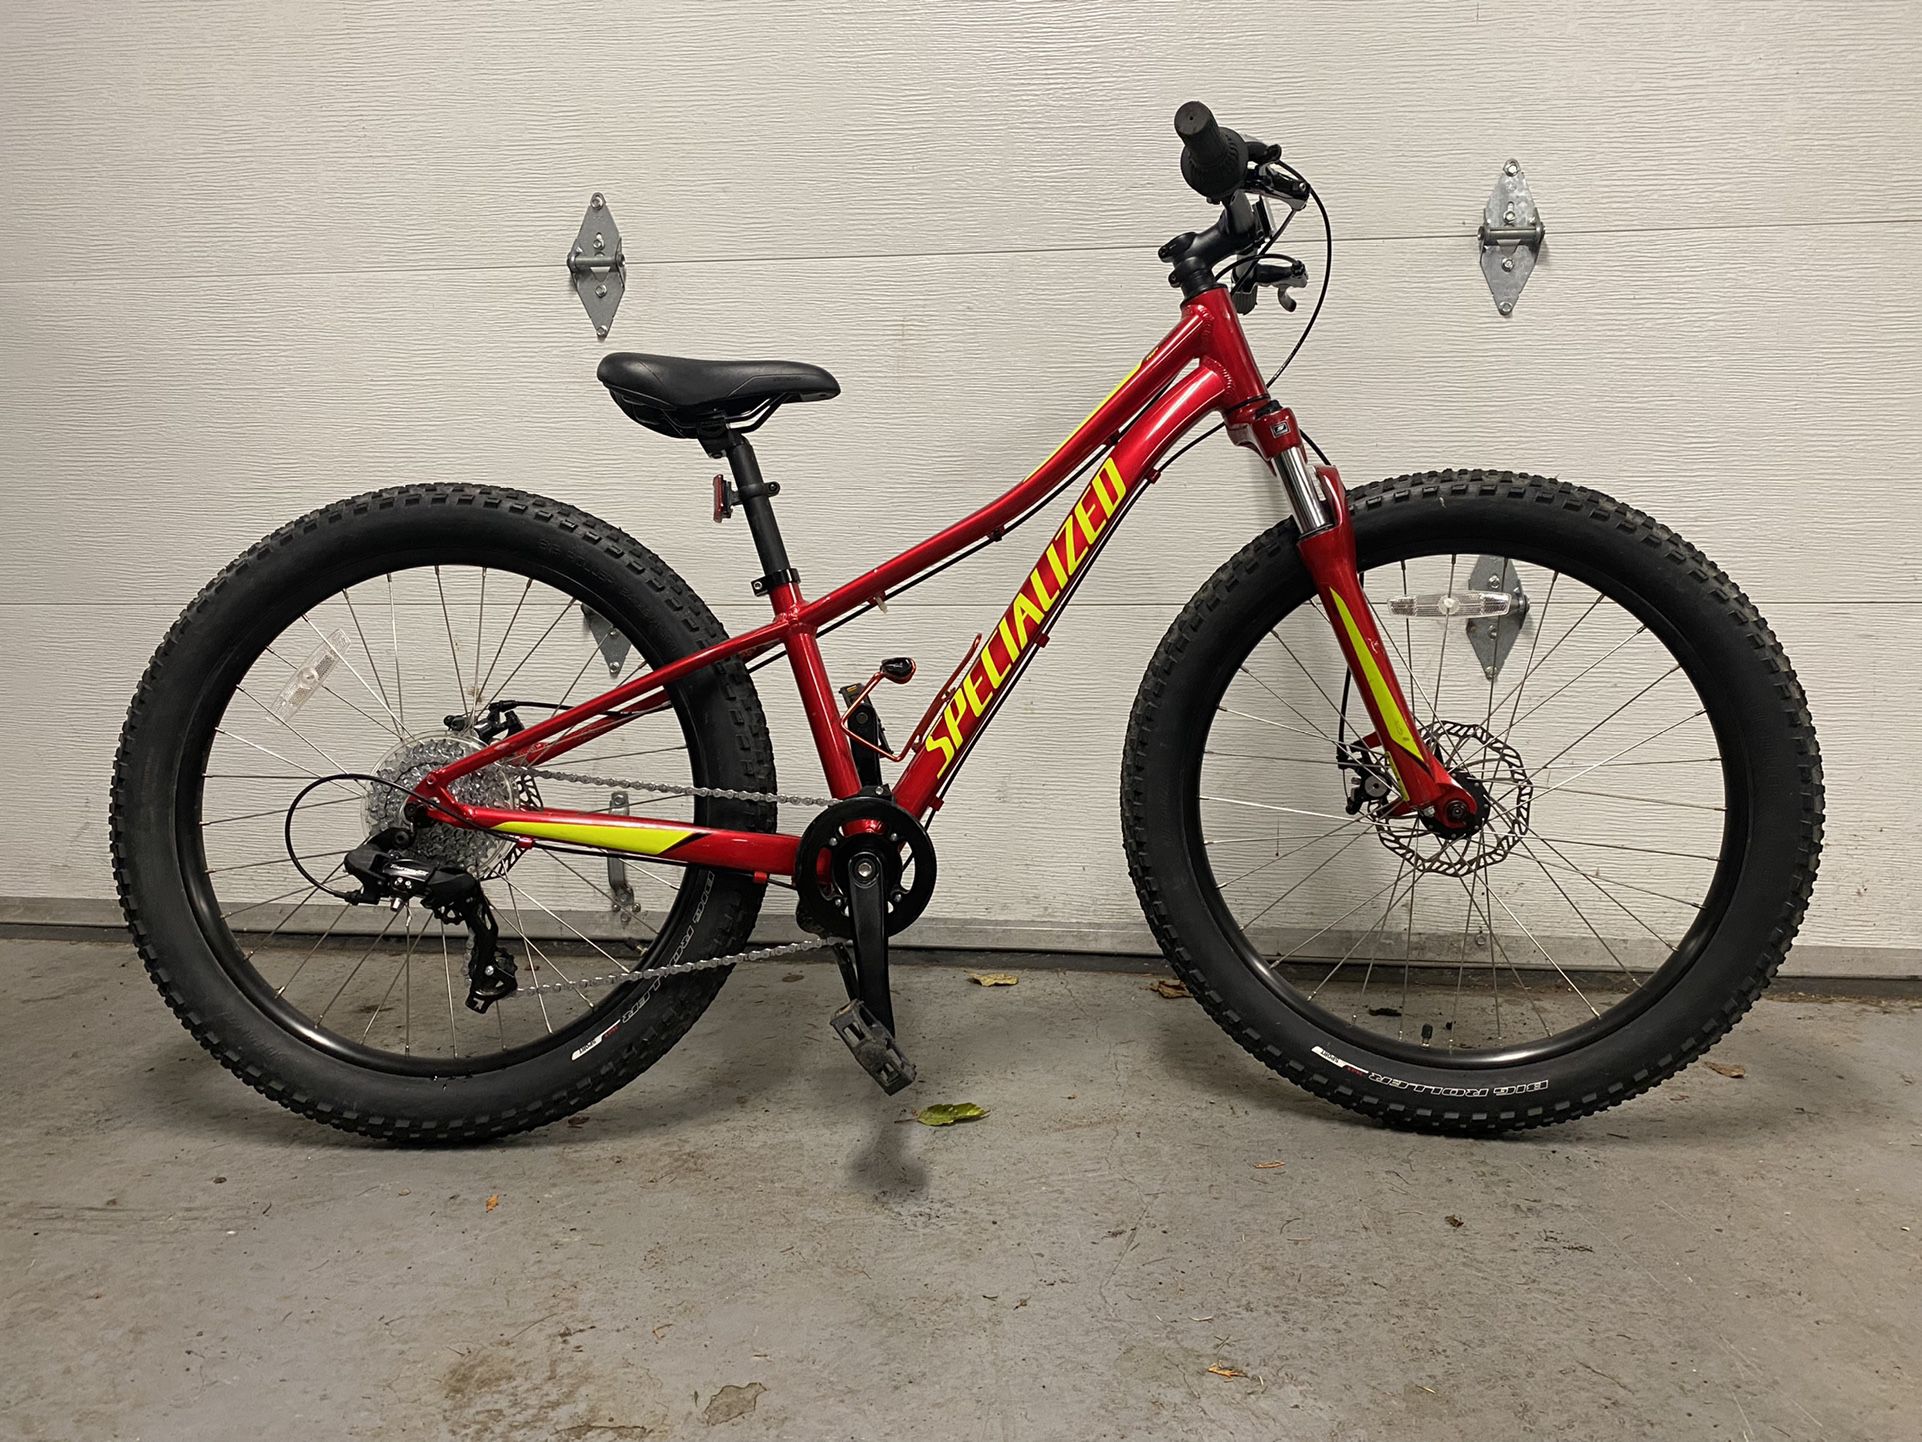 Specialized RipRock Kids Mountain Bike - 24x2.8” Tires, 1x8 Gears, Front Suspension